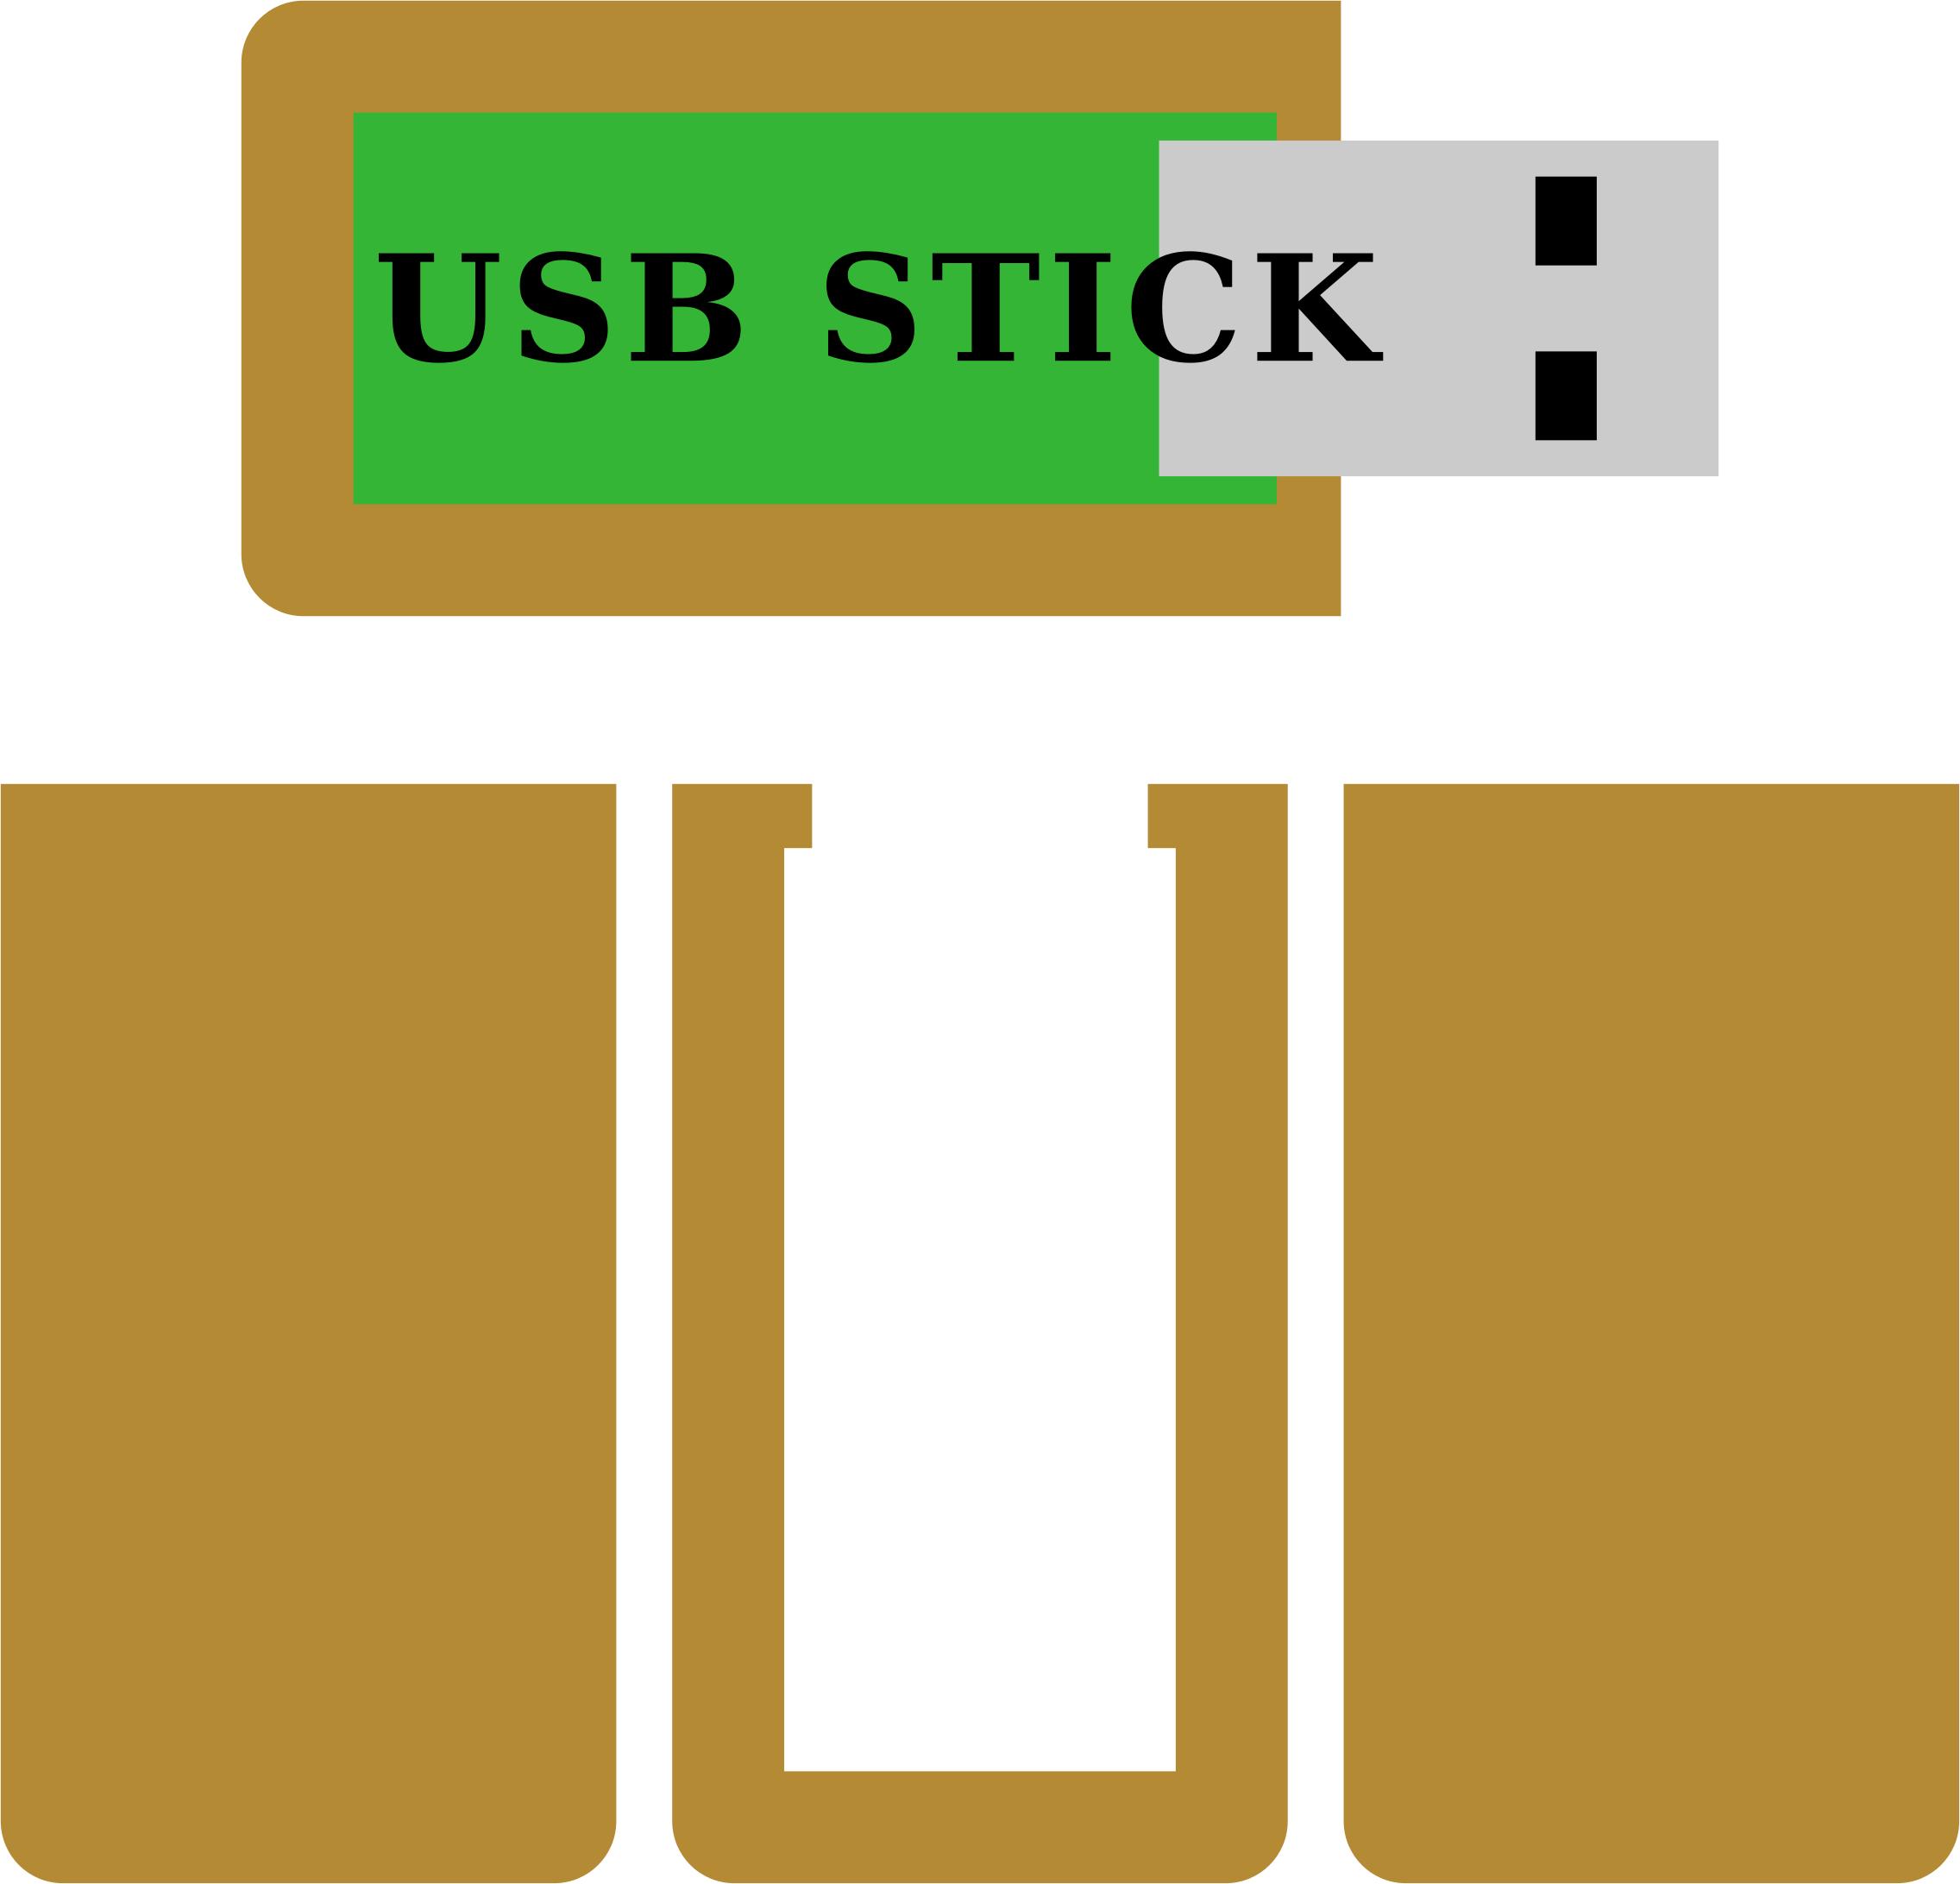 USB Stick, original size for own wooden casing png